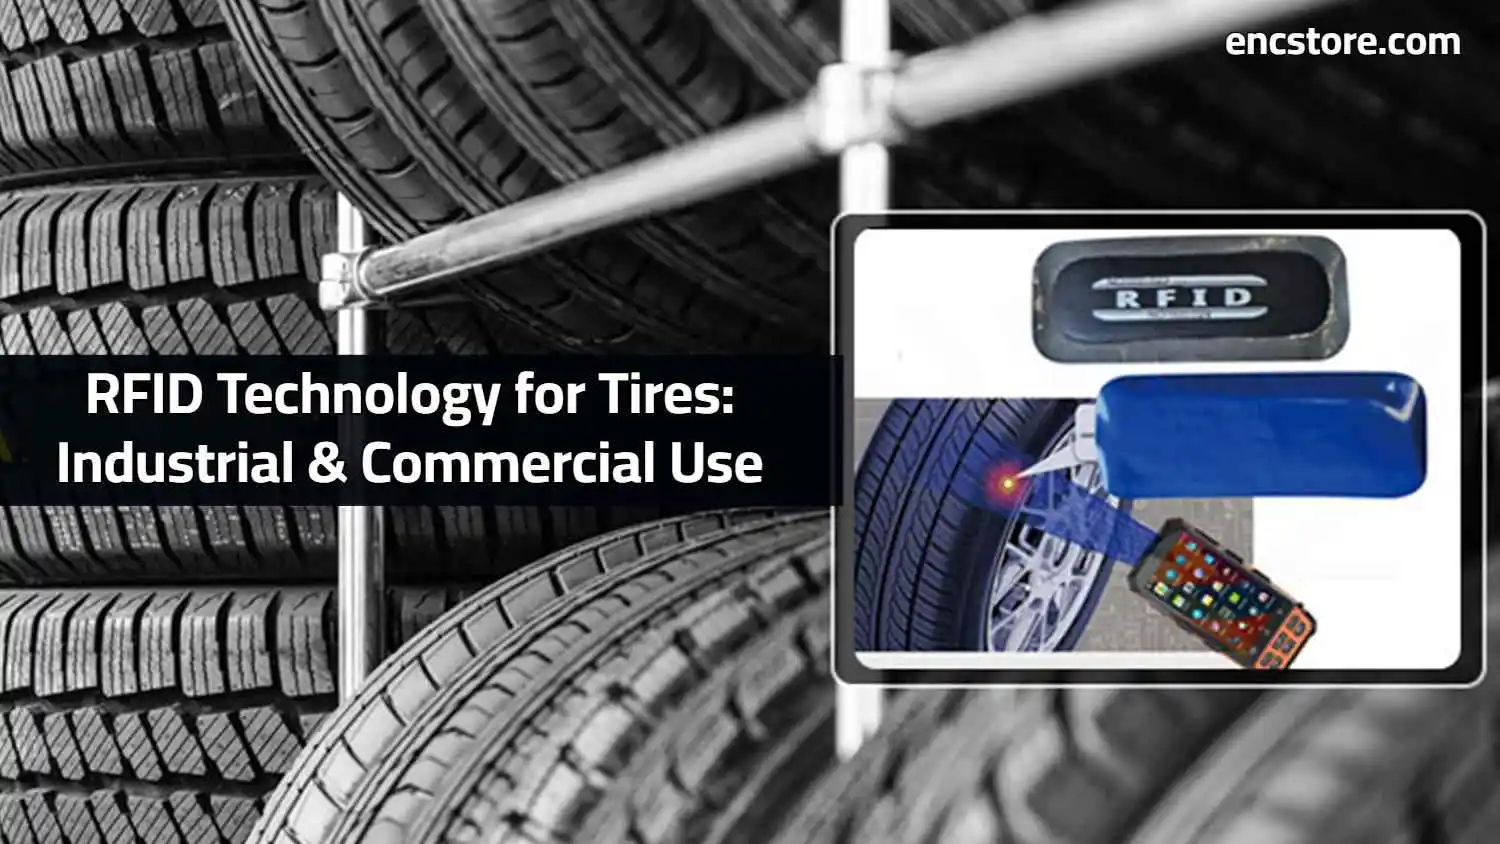 RFID Technology for Tires